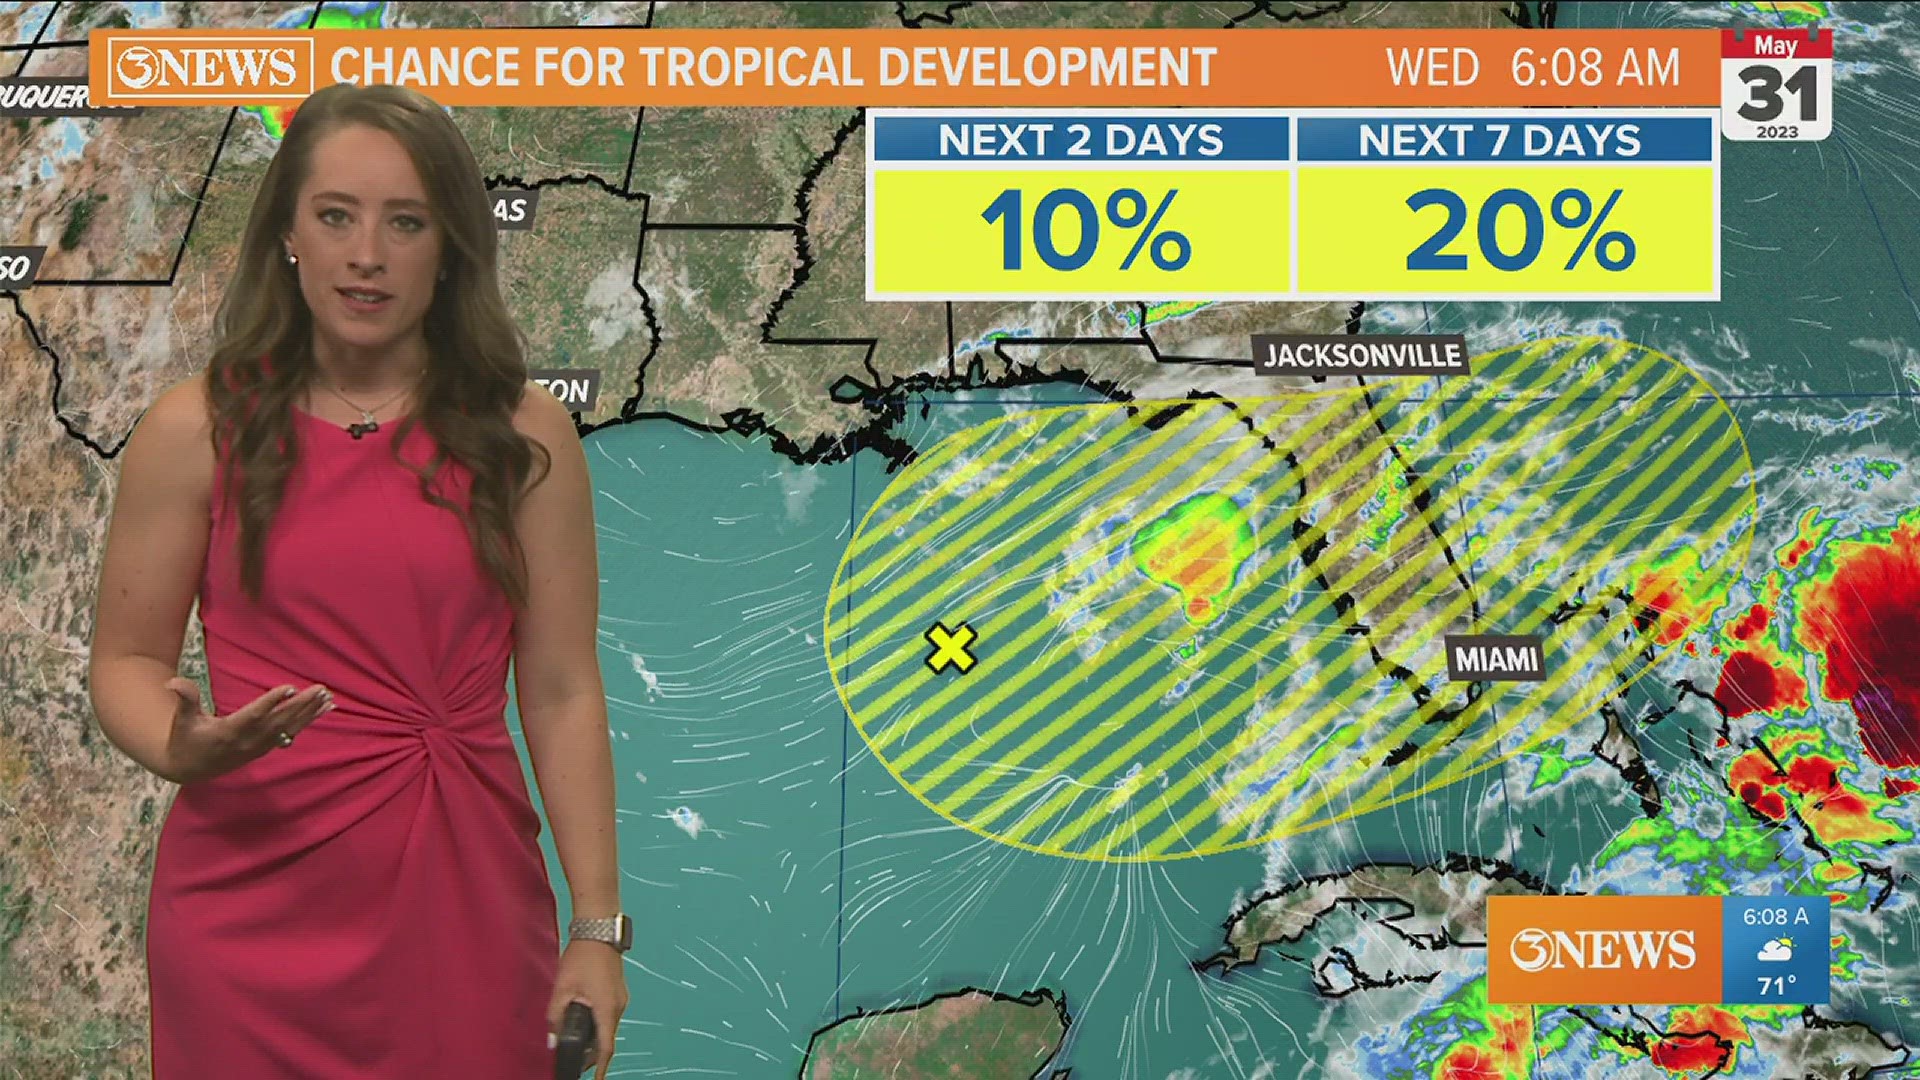 A 10-20% chance for tropical development in the eastern gulf and SW Atlantic over the next 7 days. No threats to Texas.